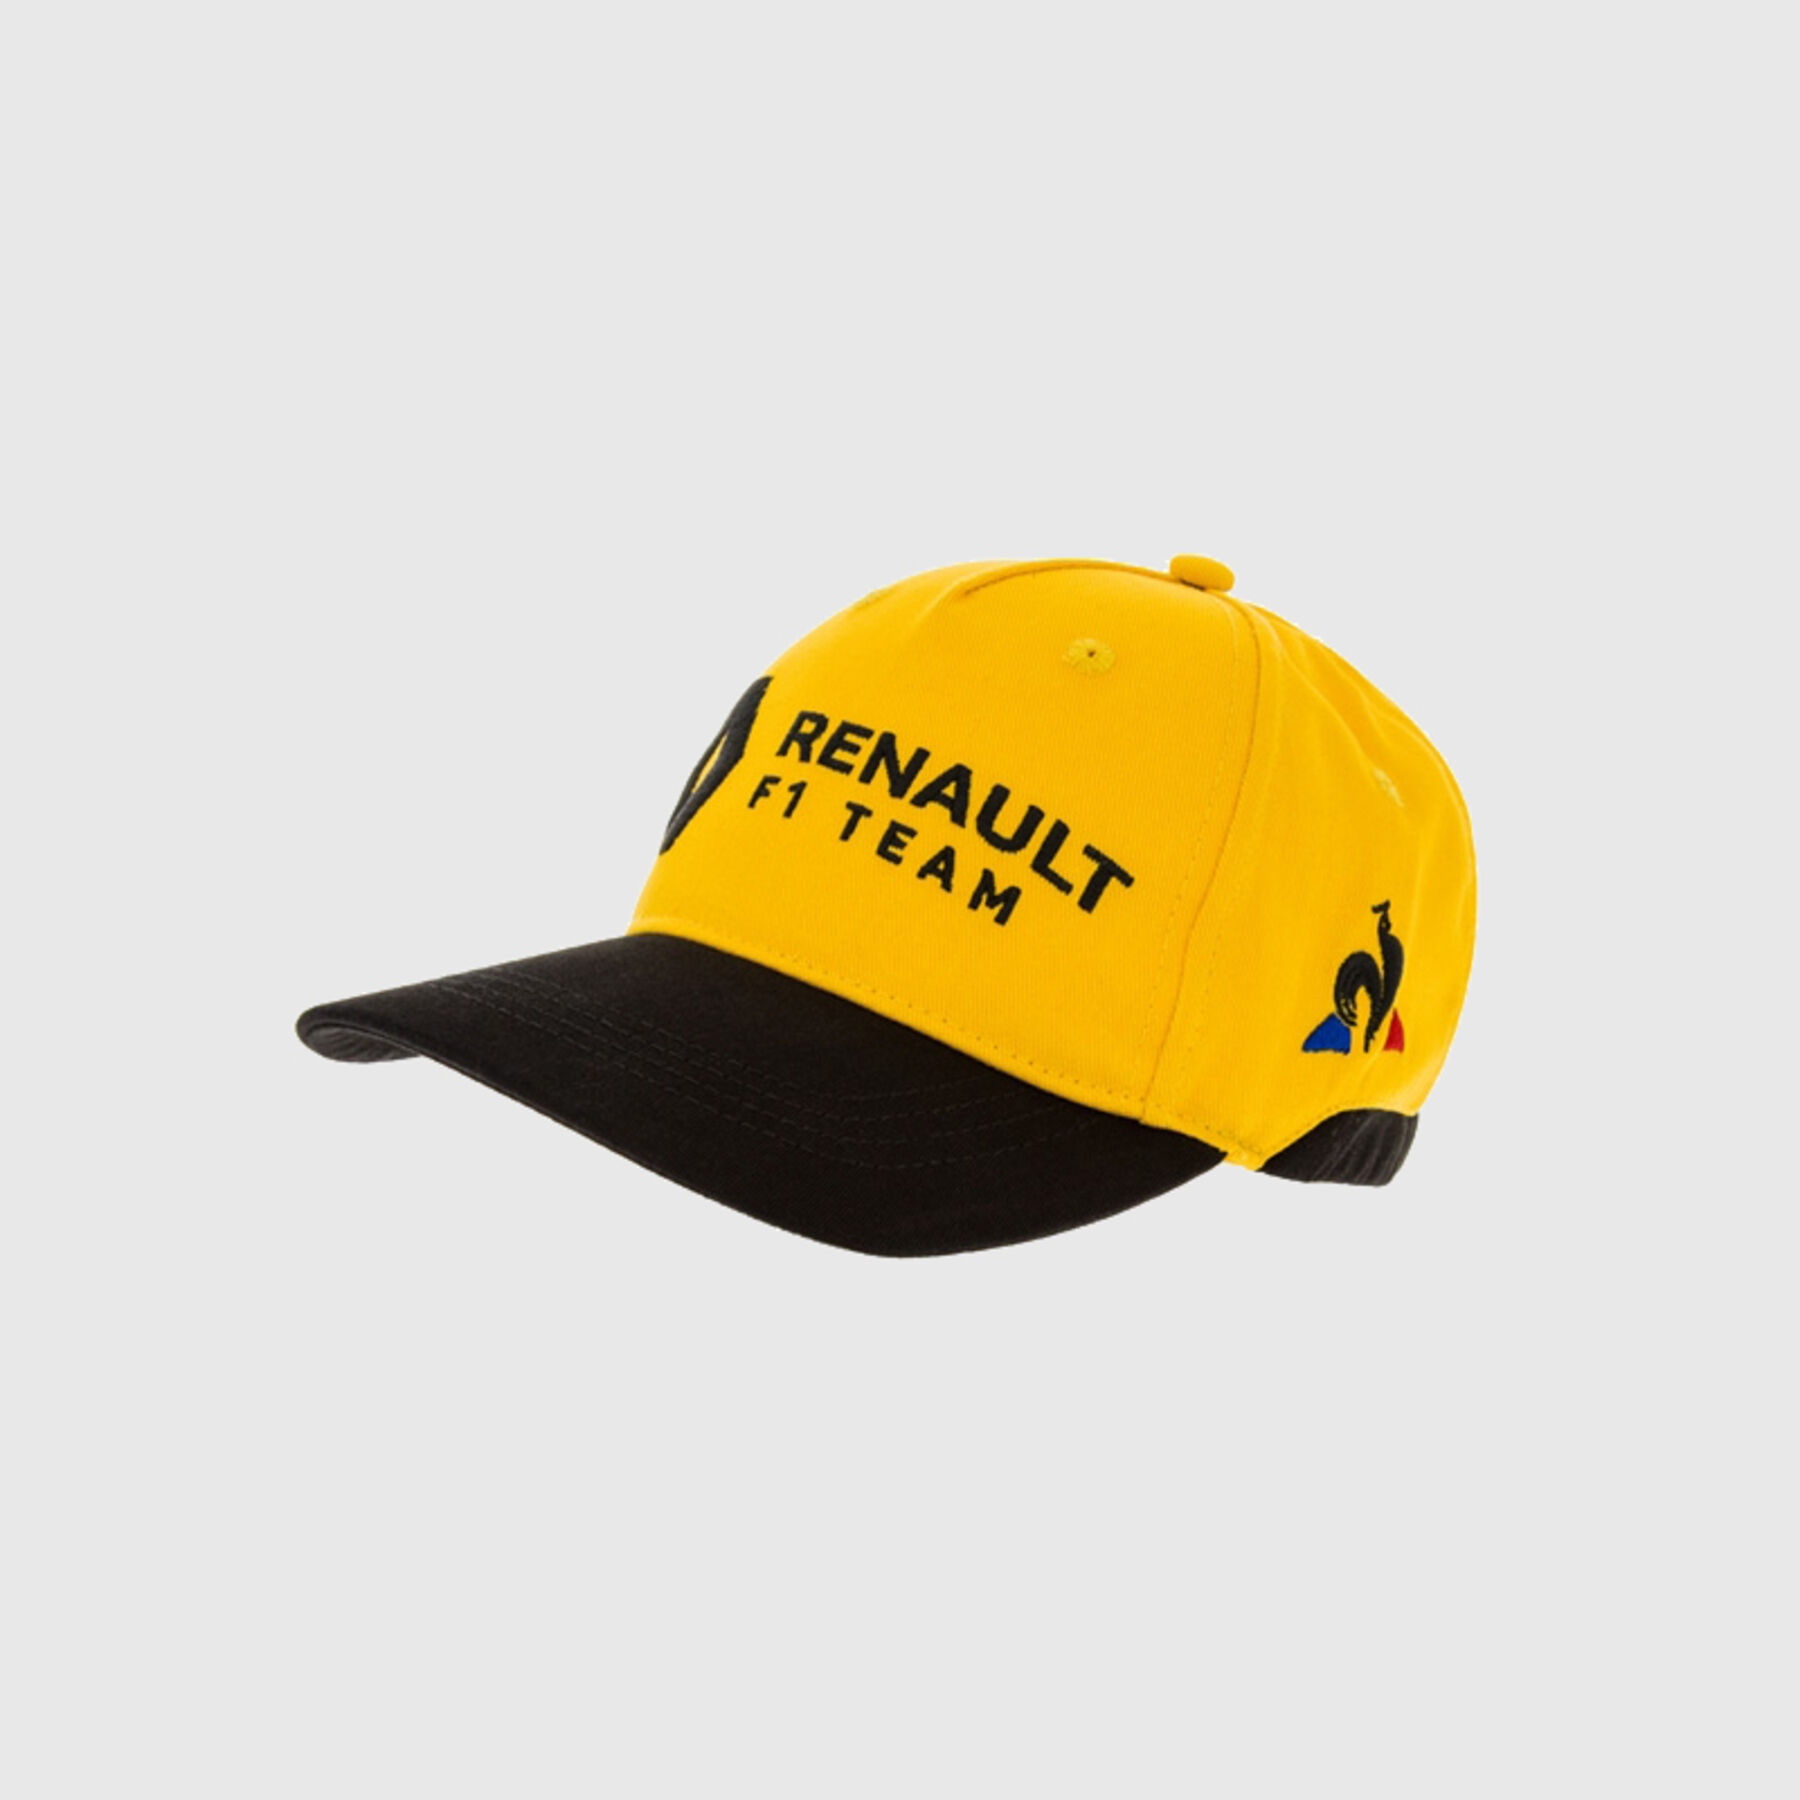 Renault F1 Team 2019 Baseball Cap YELLOW Adult One Size Official F1 Merchandise